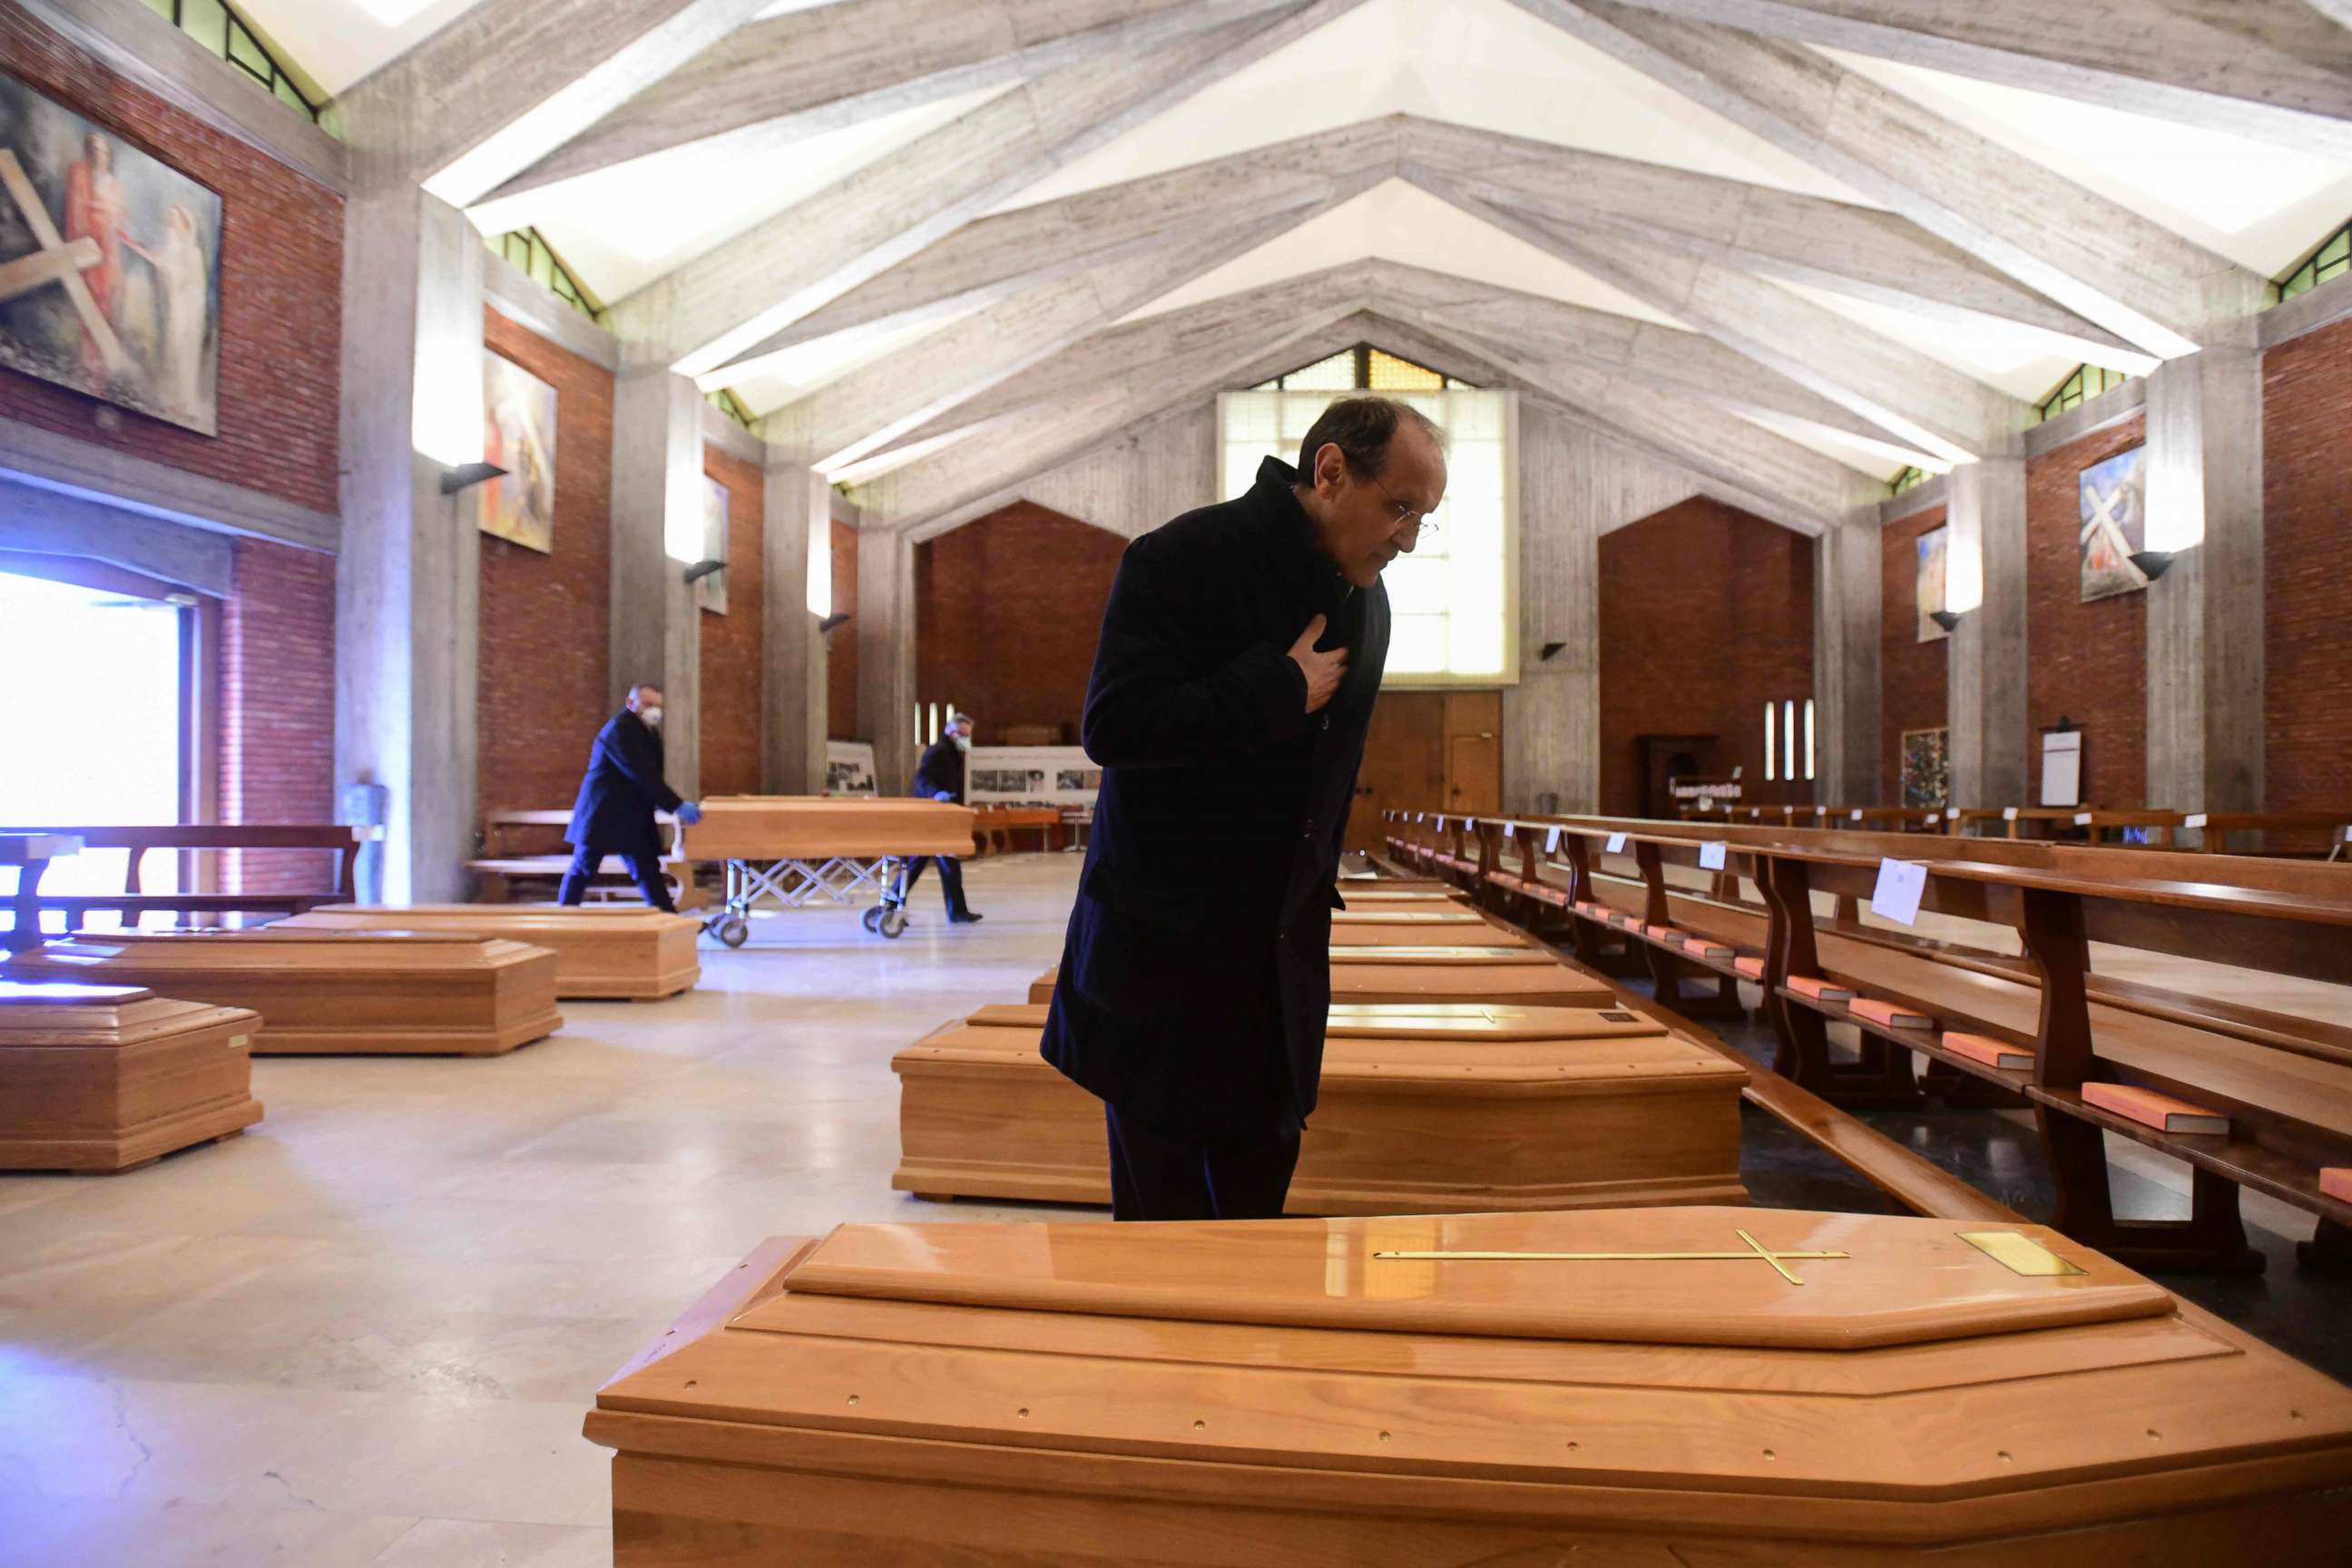 PHOTO: Parish priest of Seriate, Don Mario stands by one of the coffins stored into the church of San Giuseppe in Seriate, near Bergamo, Lombardy, on March 26, 2020, during the country's lockdown following the coronavirus pandemic.